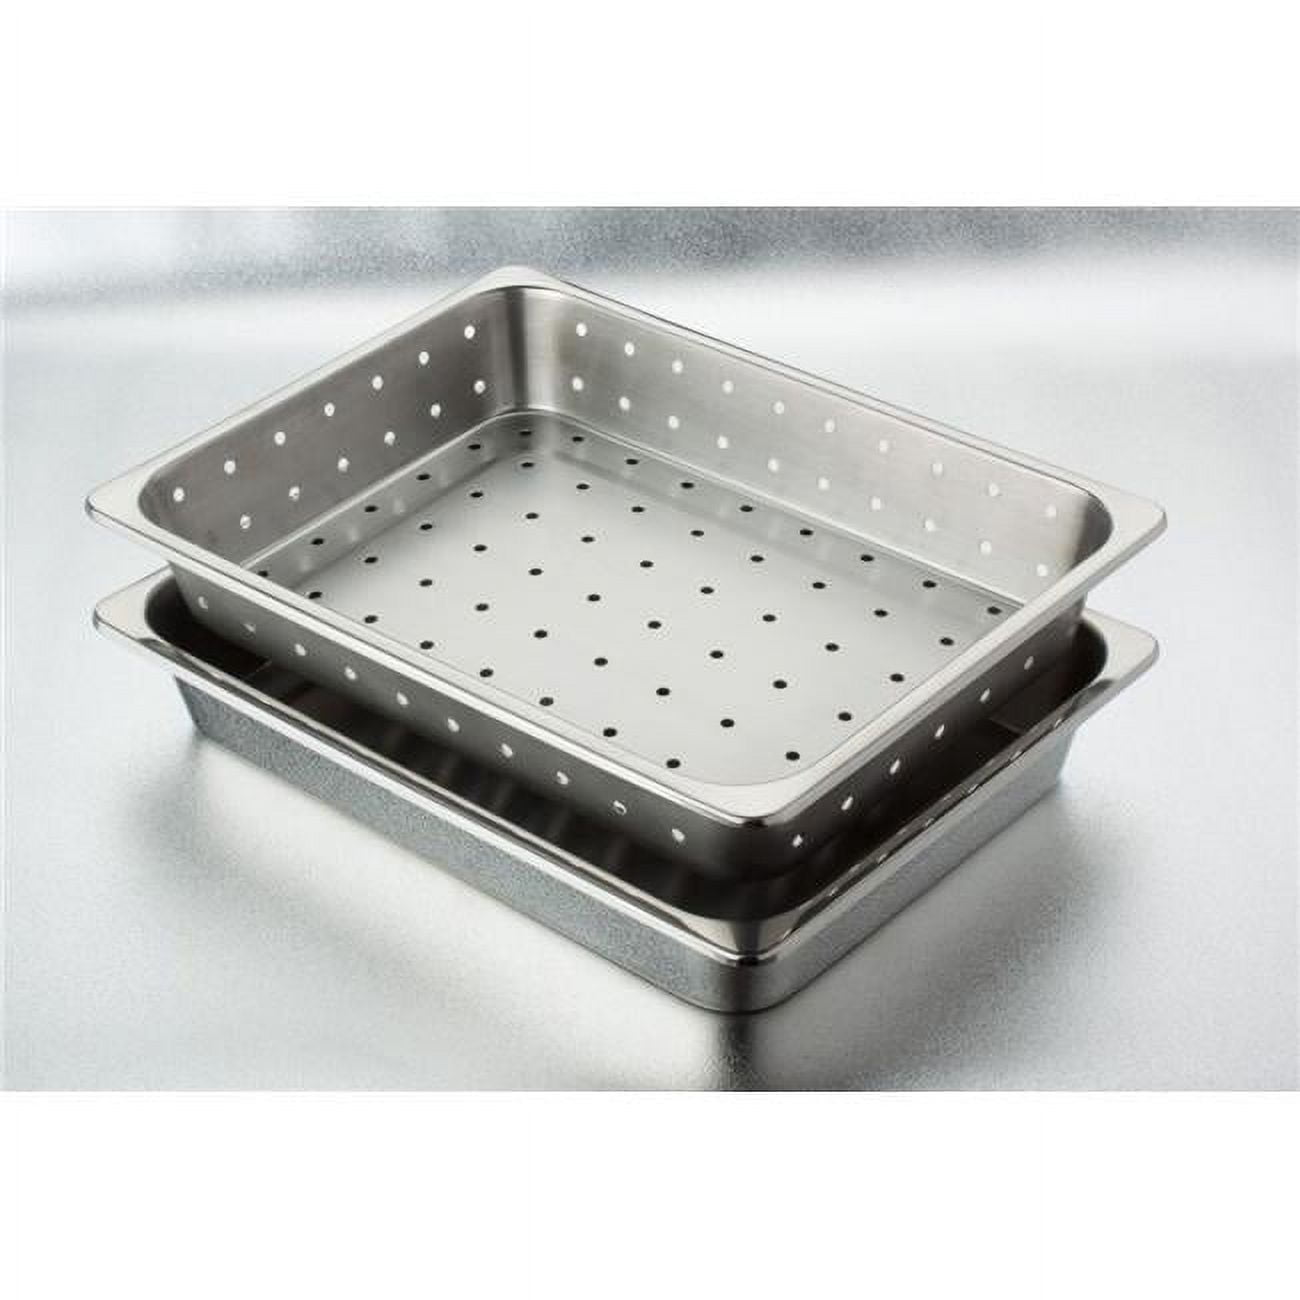 4275p Stainless Steel Perforated Insert Tray